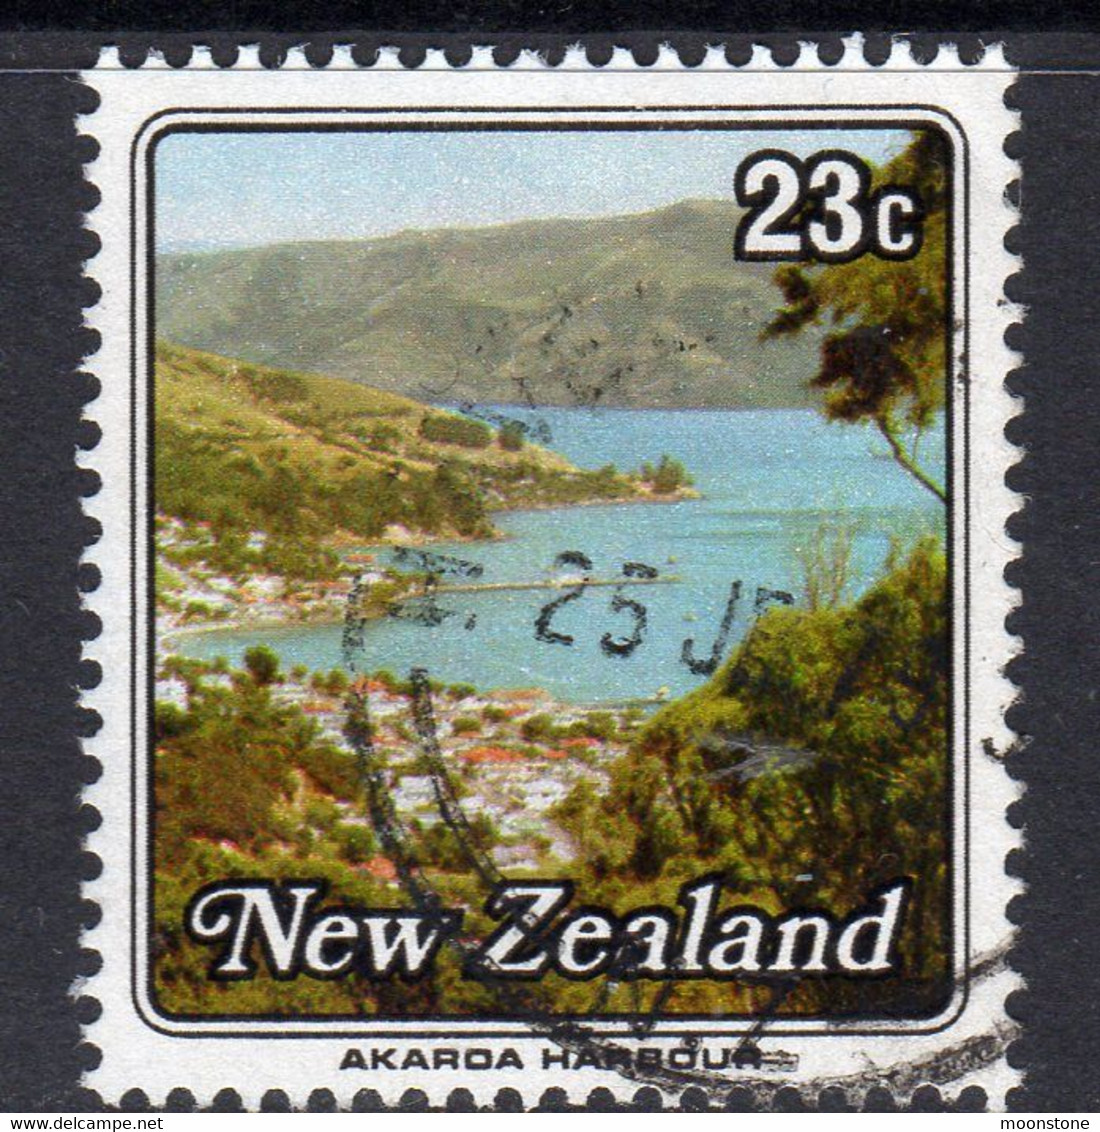 New Zealand 1979 Small Harbours 23c Value, Used, SG 1194 (A) - Usados